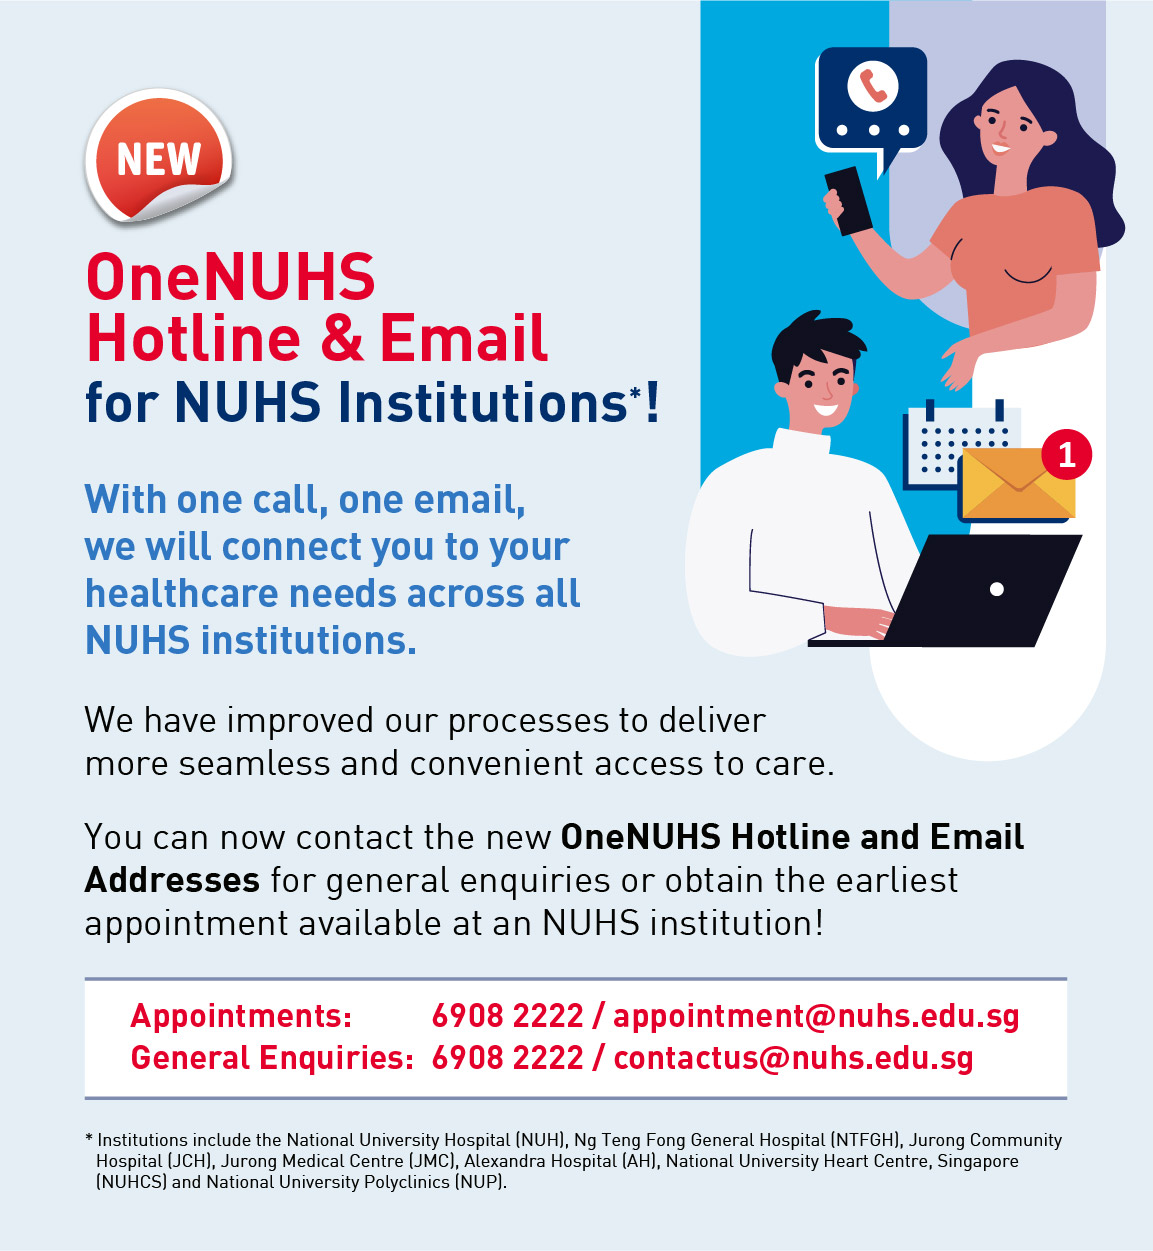 New OneNUHS Appointment and General Enquiry Hotline and Email Addresses from 9 July 2022!